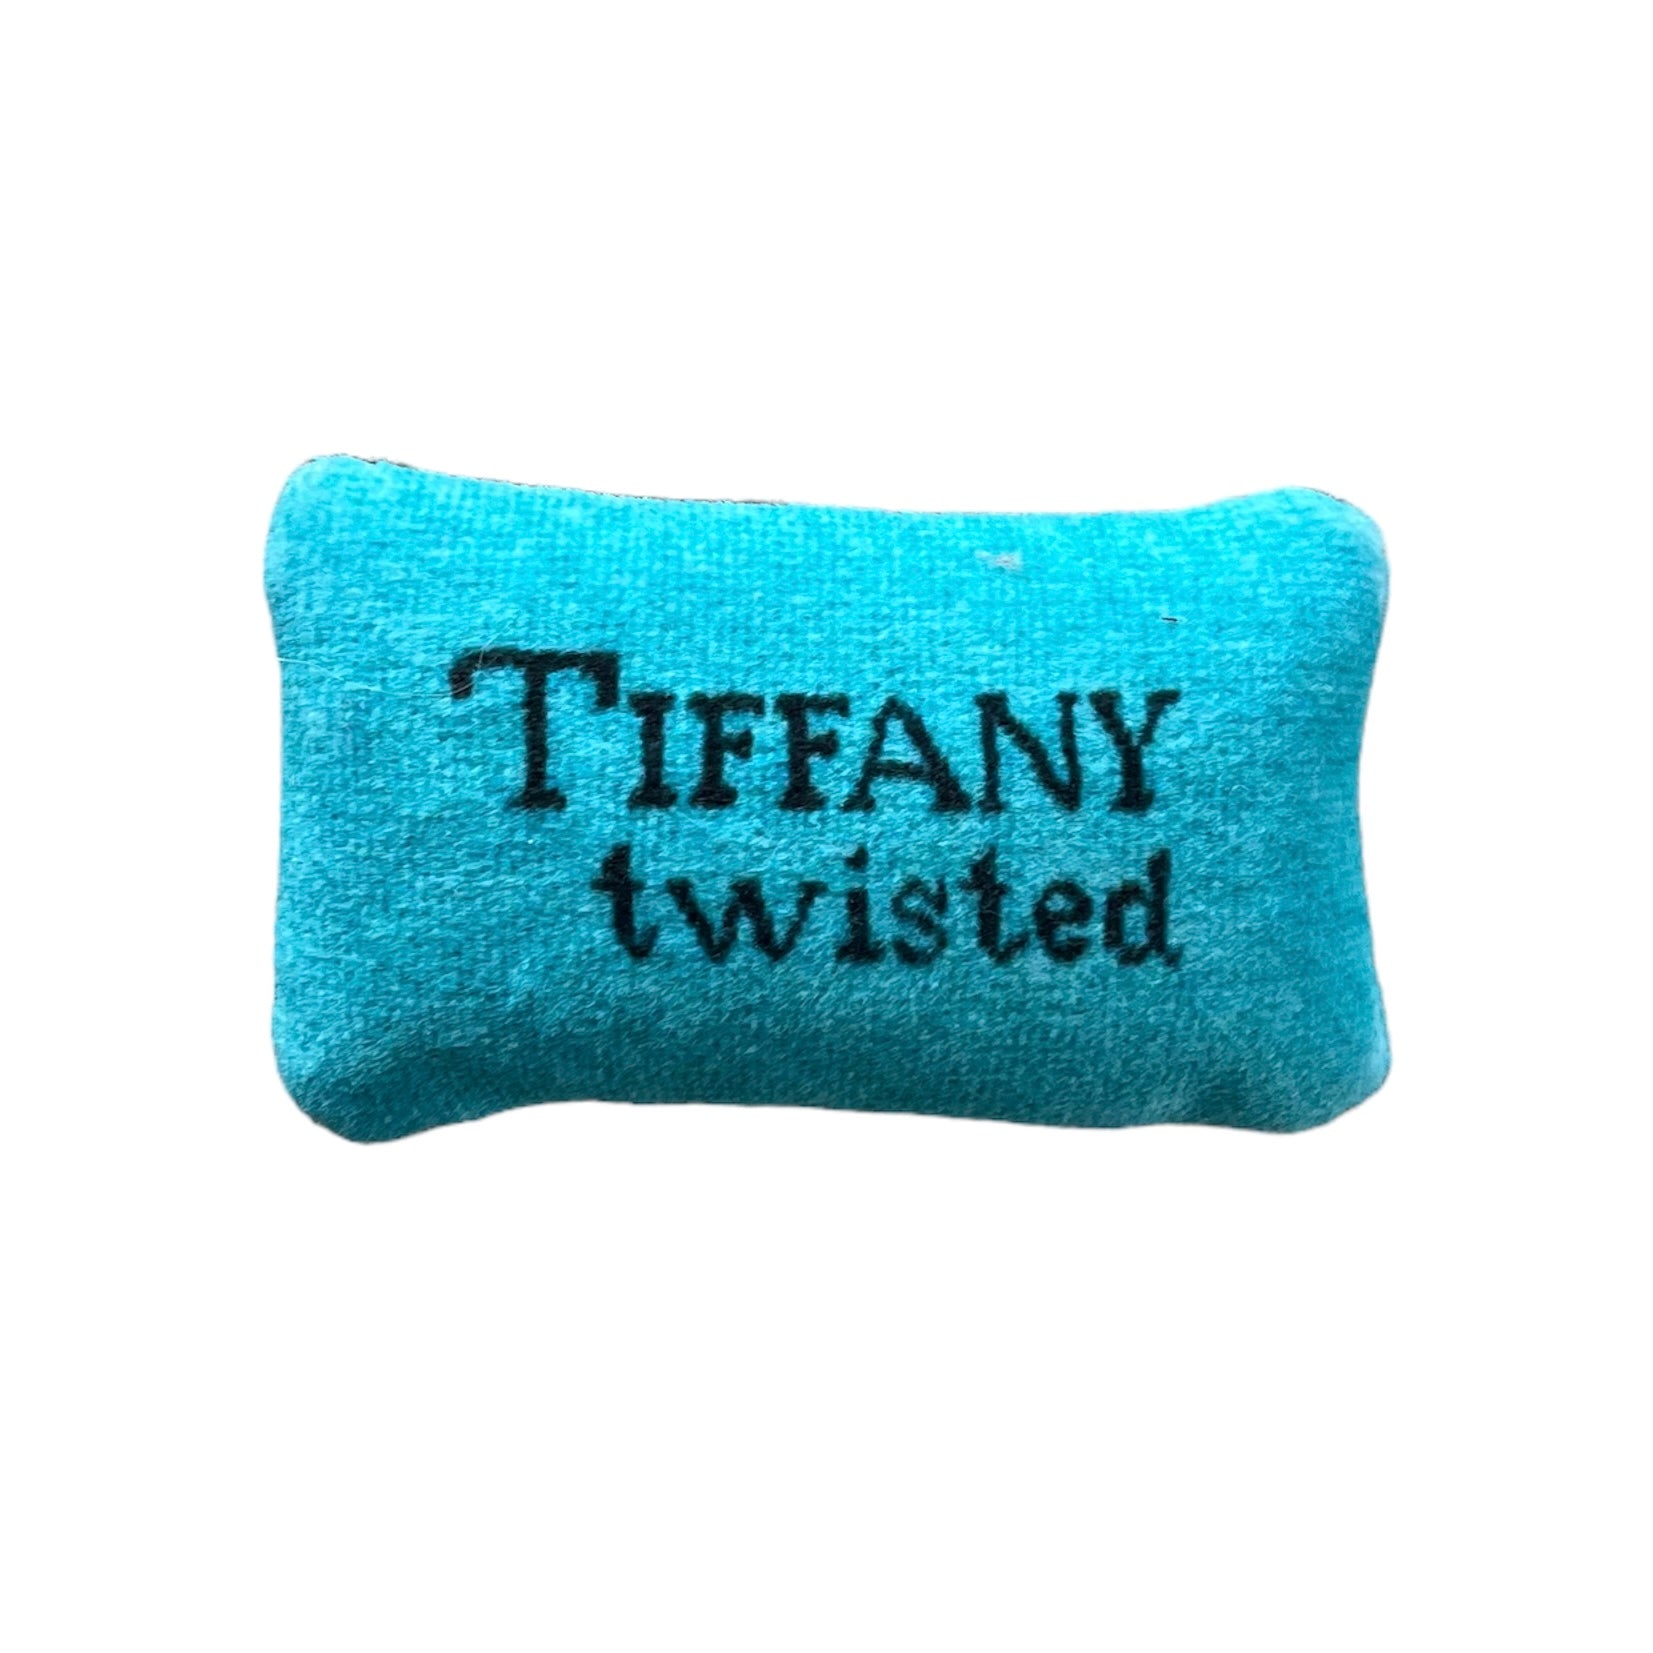 organic French lavender sachet reads "Tiffany Twisted" in classic Tiffany script on Tiffany blue background